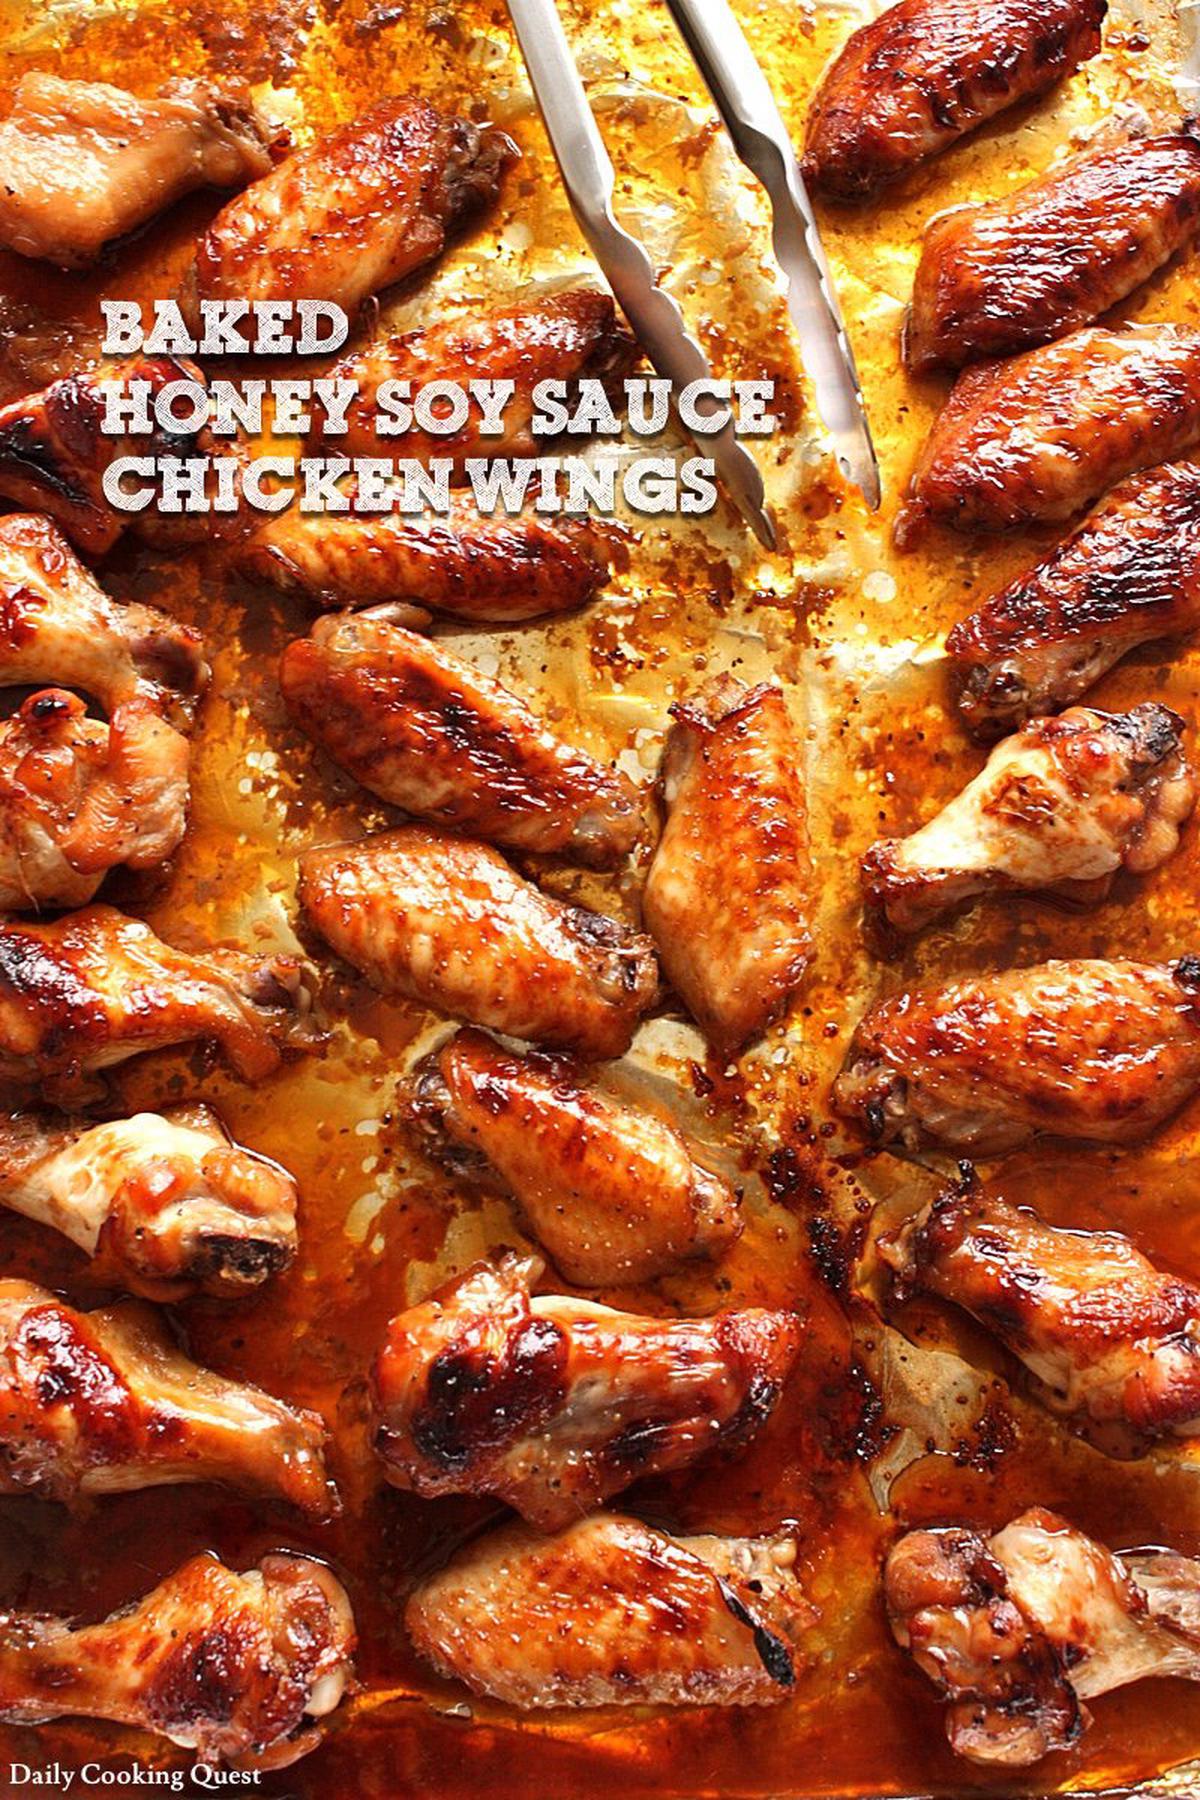 Baked Honey Soy Sauce Chicken Wings